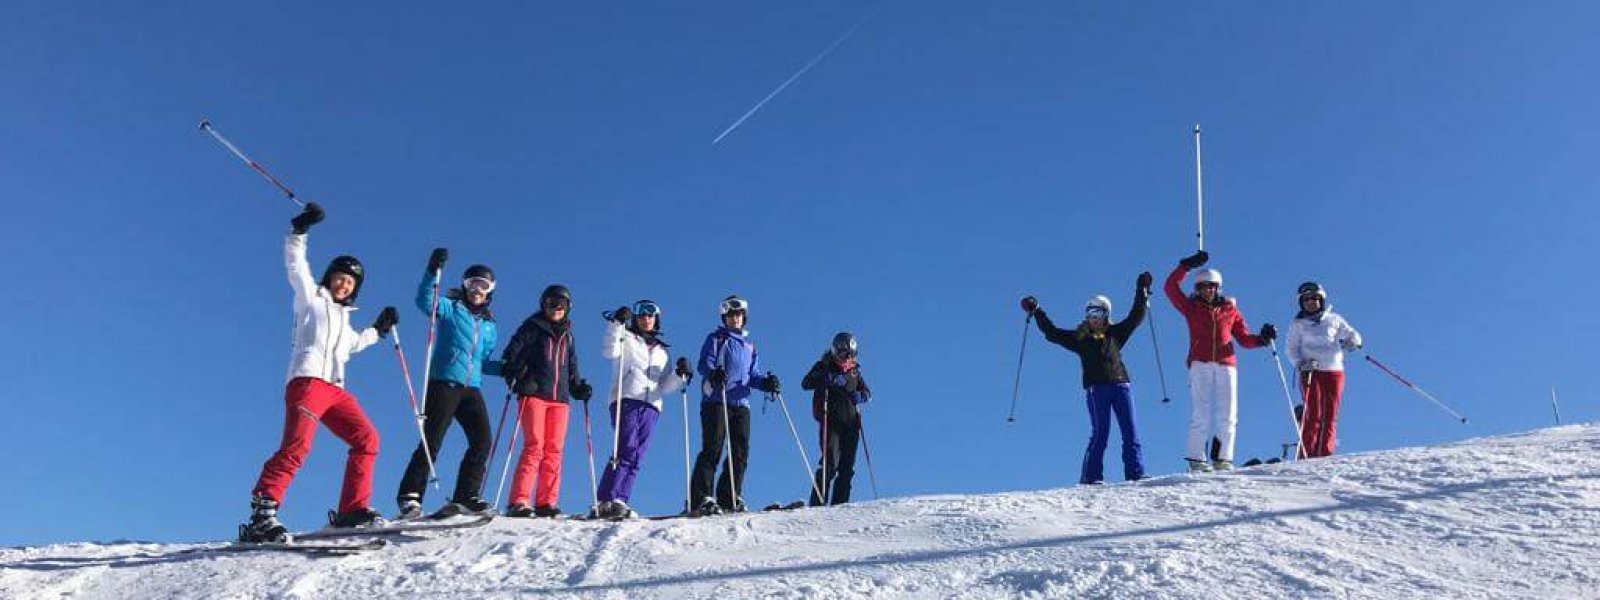 Skiing Holidays – <br>Why the 2021/22 ski season will be amazing